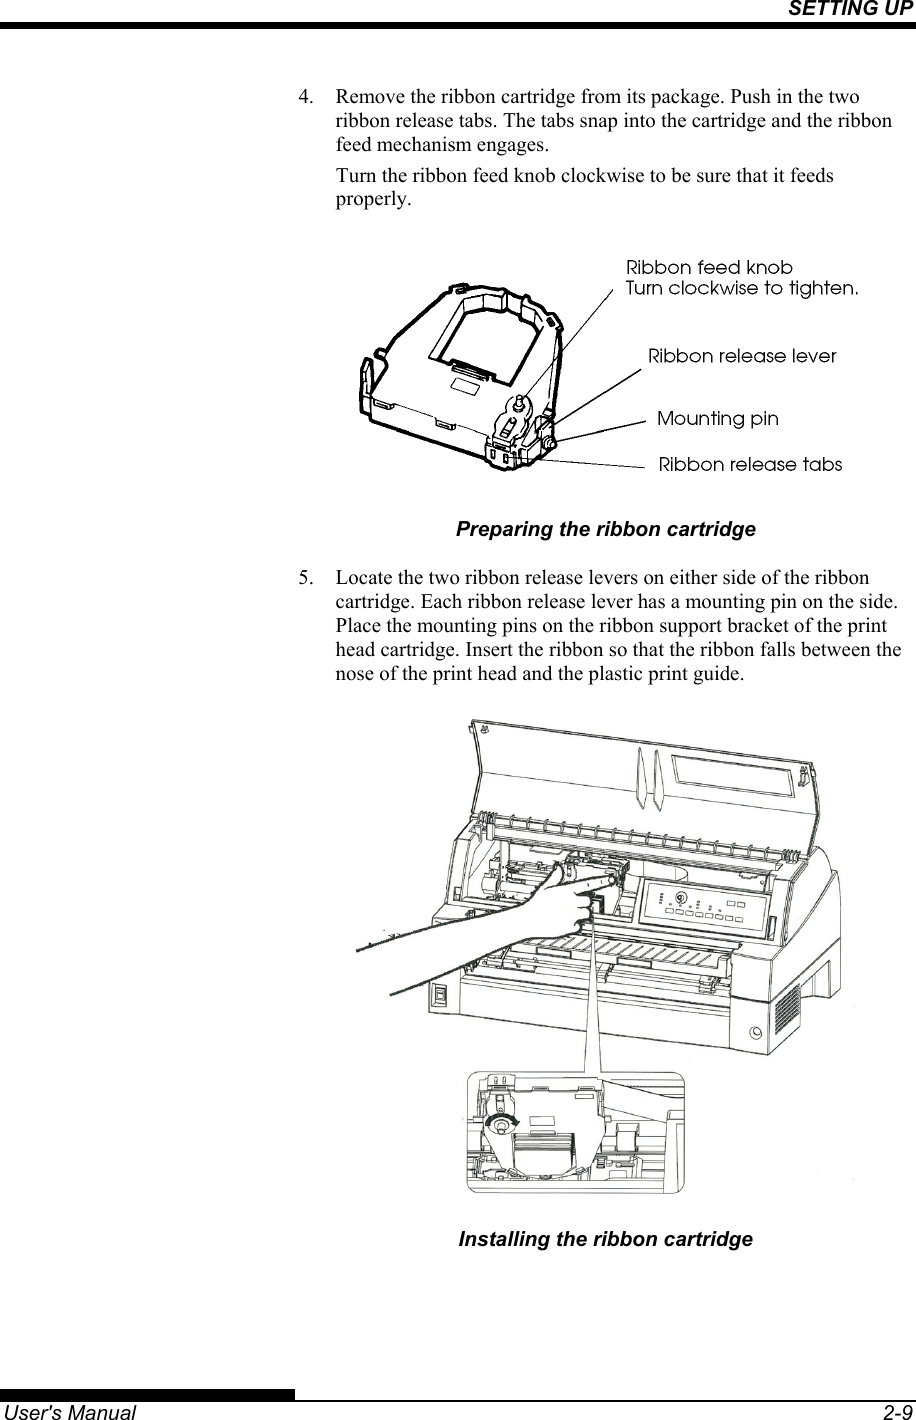 SETTING UP   User&apos;s Manual  2-9 4.  Remove the ribbon cartridge from its package. Push in the two ribbon release tabs. The tabs snap into the cartridge and the ribbon feed mechanism engages. Turn the ribbon feed knob clockwise to be sure that it feeds properly.  Preparing the ribbon cartridge 5.  Locate the two ribbon release levers on either side of the ribbon cartridge. Each ribbon release lever has a mounting pin on the side. Place the mounting pins on the ribbon support bracket of the print head cartridge. Insert the ribbon so that the ribbon falls between the nose of the print head and the plastic print guide.  Installing the ribbon cartridge 